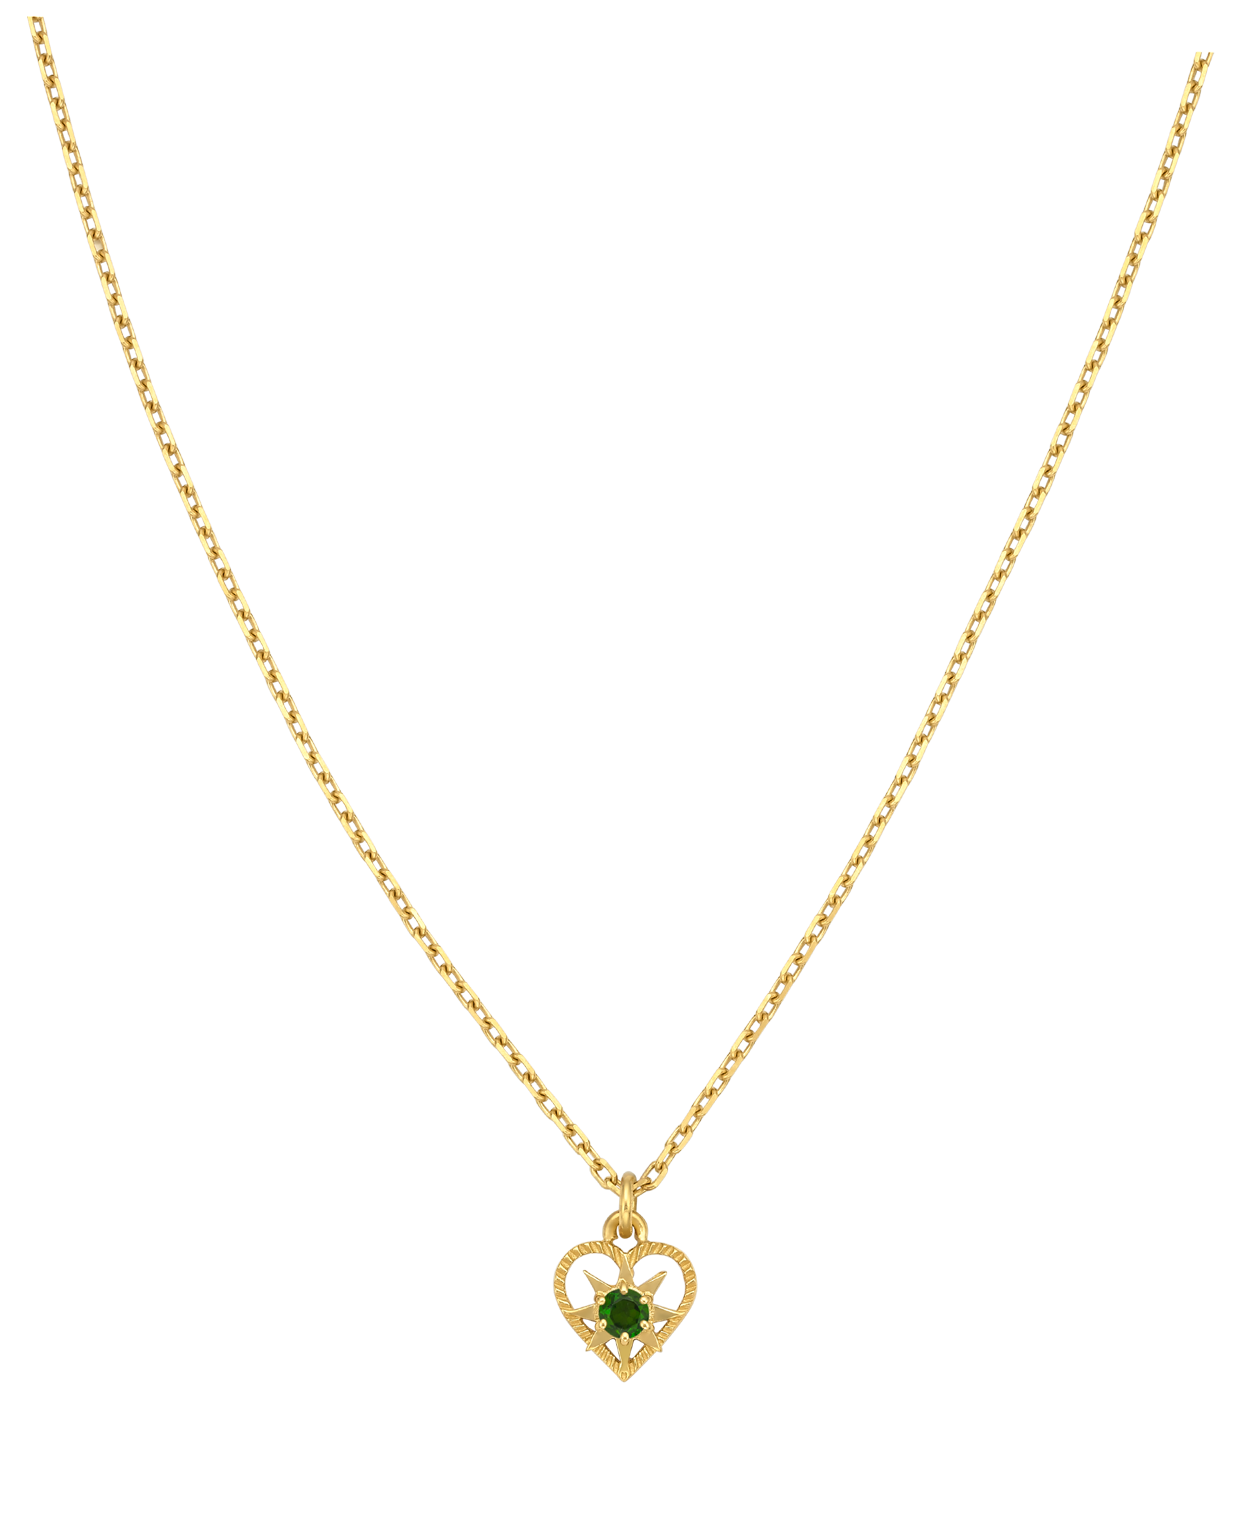 Zoe & Morgan | Kind Heart Necklace - Gold/Chrome Diopside